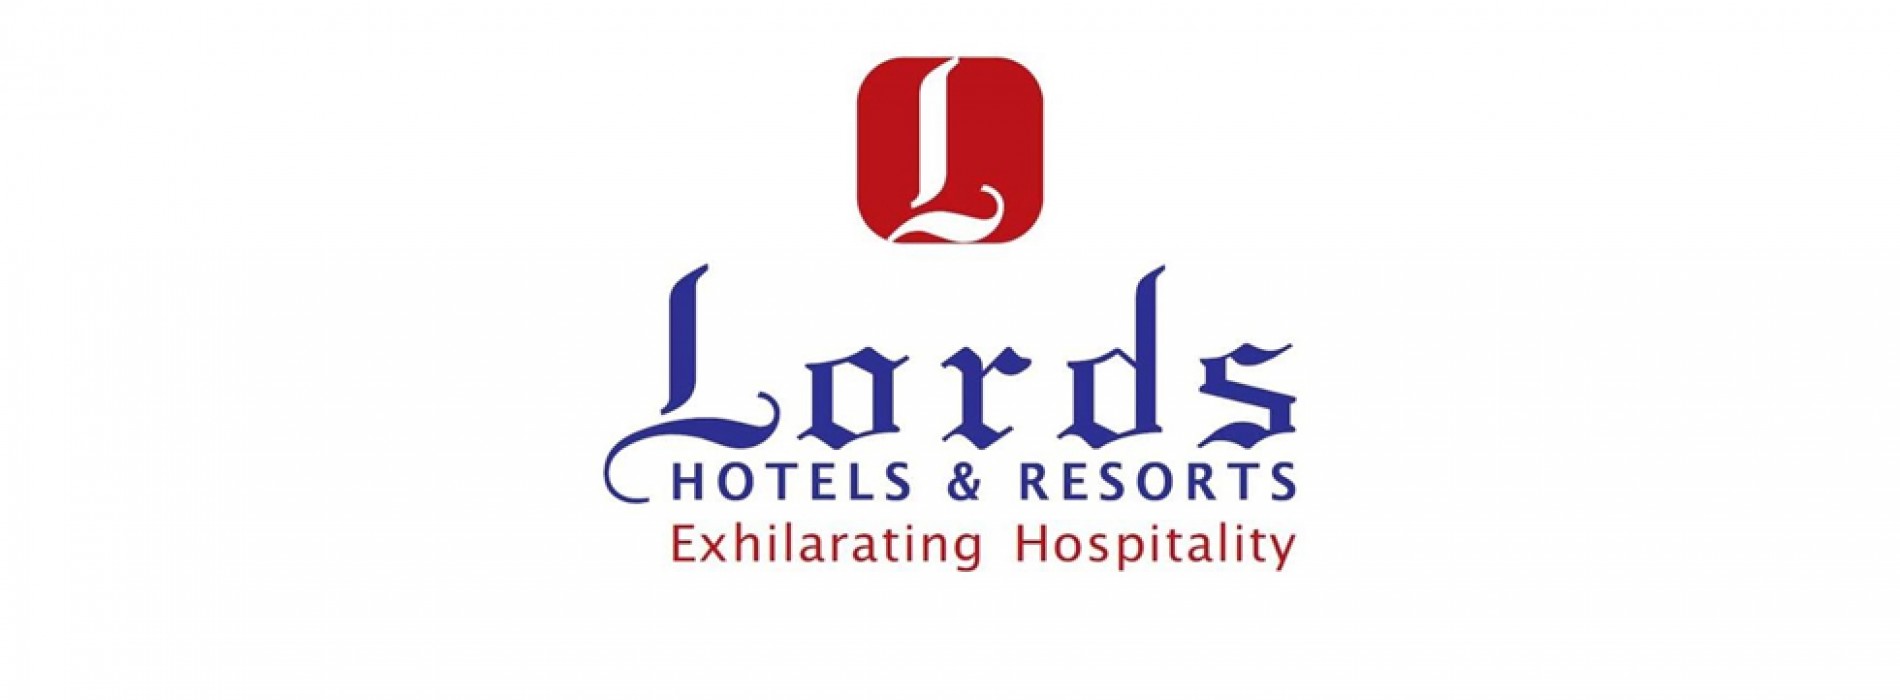 Lords Hotels & Resorts to launch an iconic luxury resort in Kathmandu, Nepal